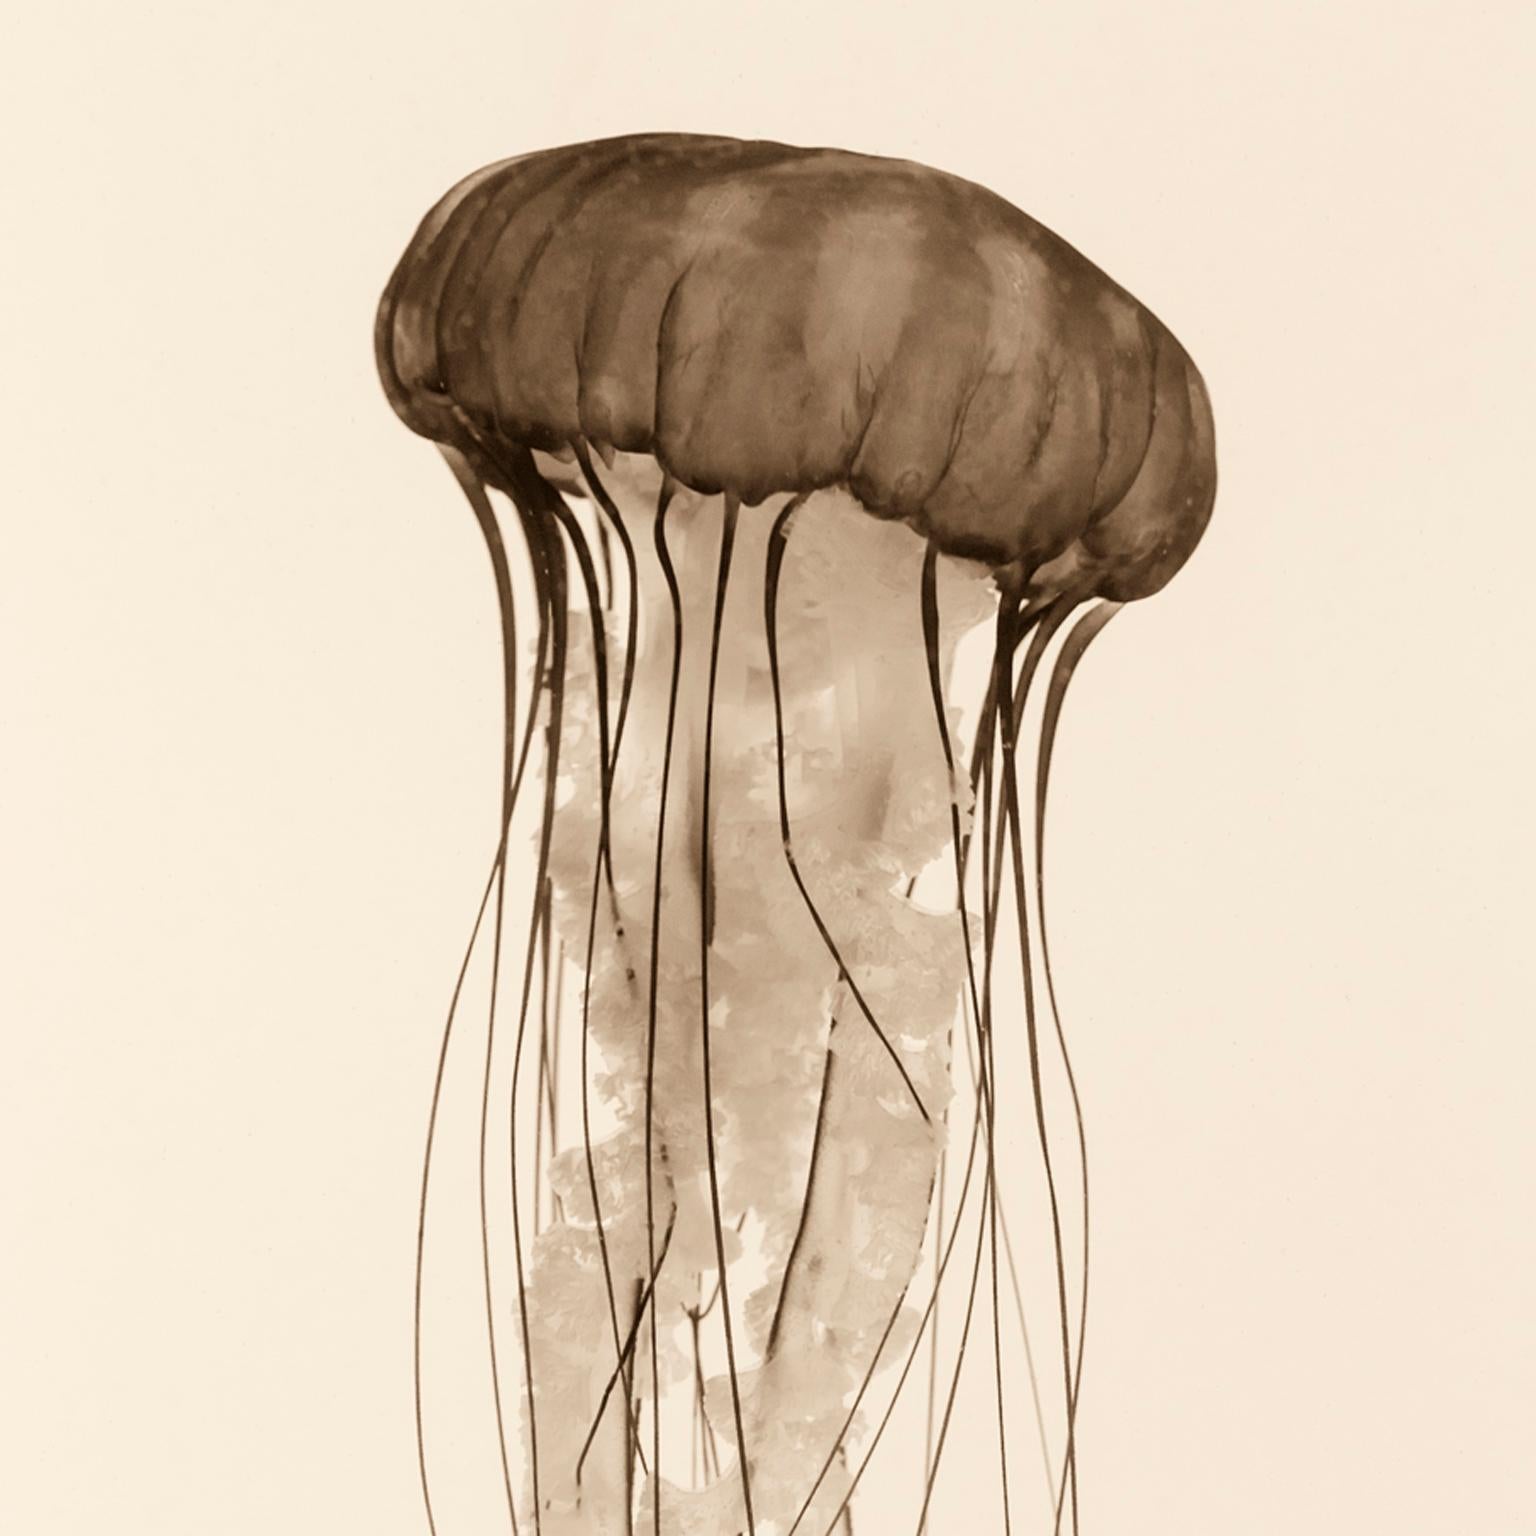 Pacific Sea Nettle - Photograph by Cosmo Condina